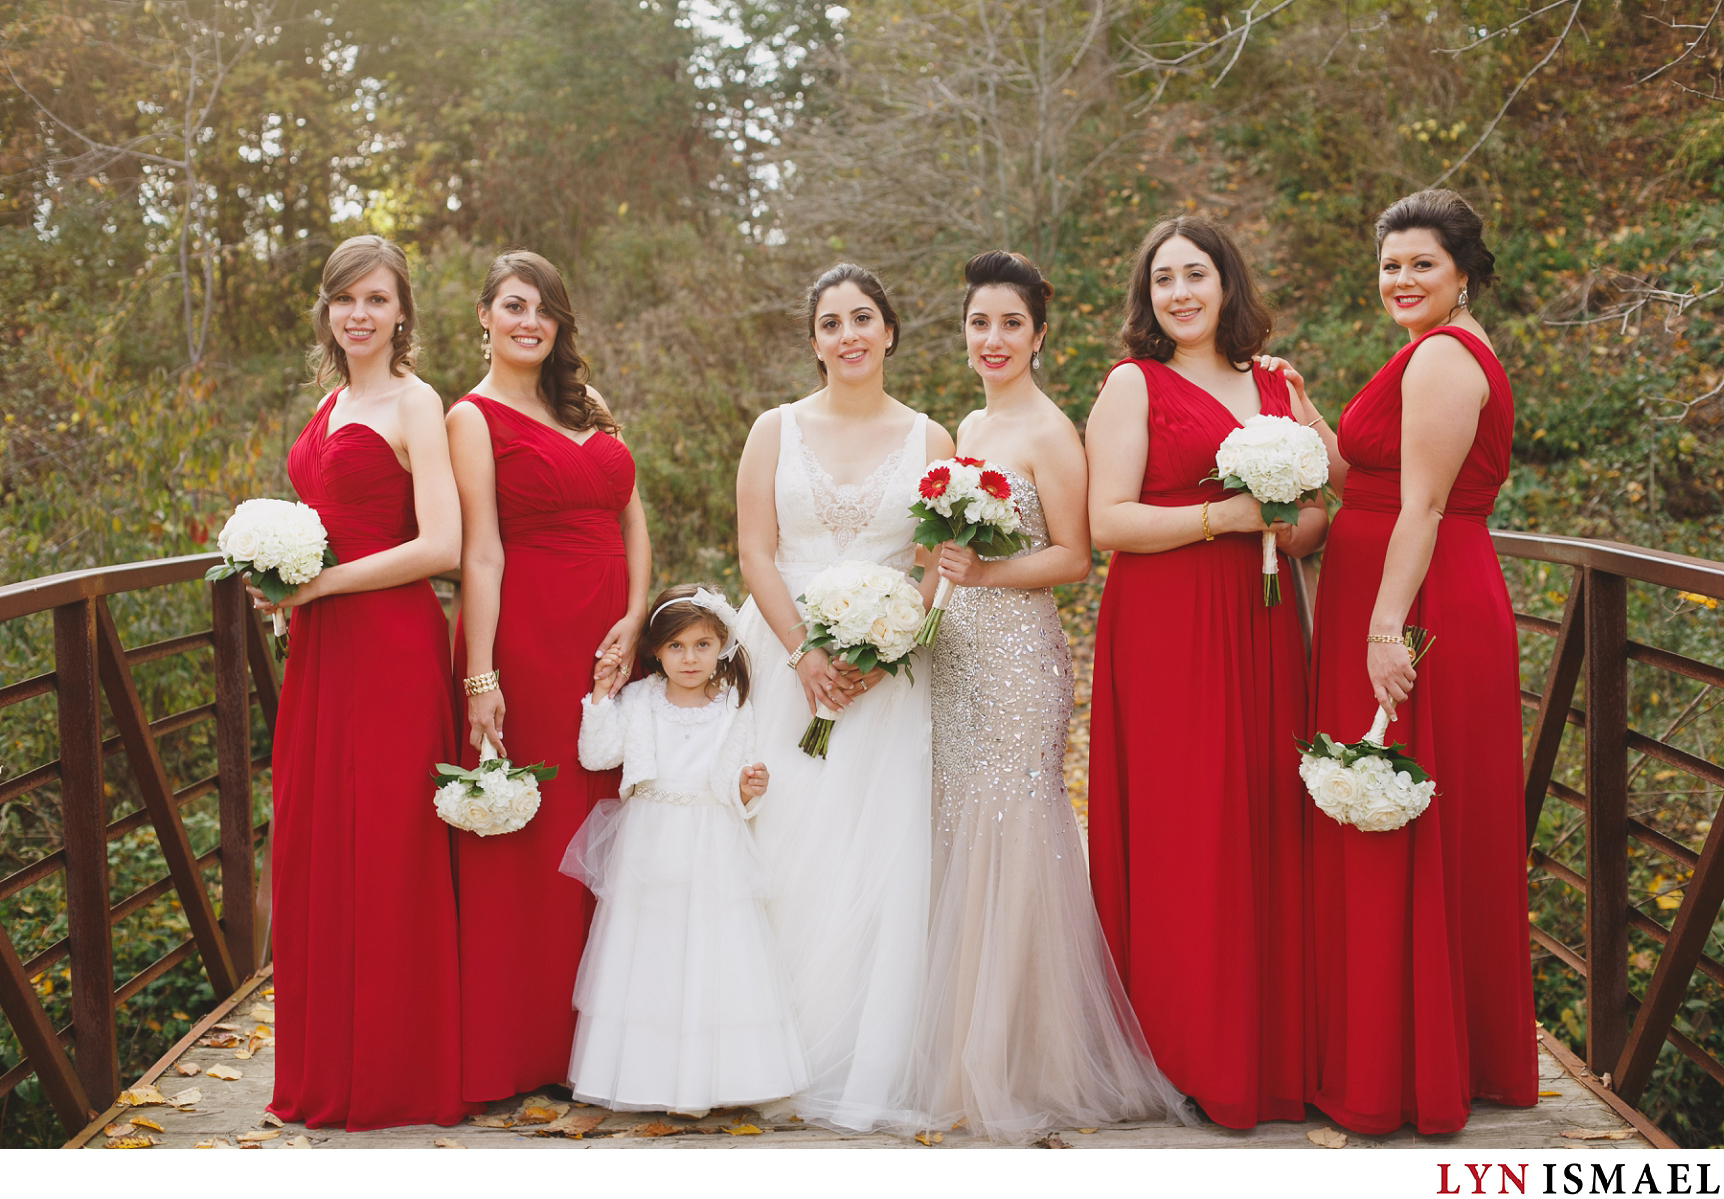 Portraits of the bride and her bridesmaids at Naylon Parkette.